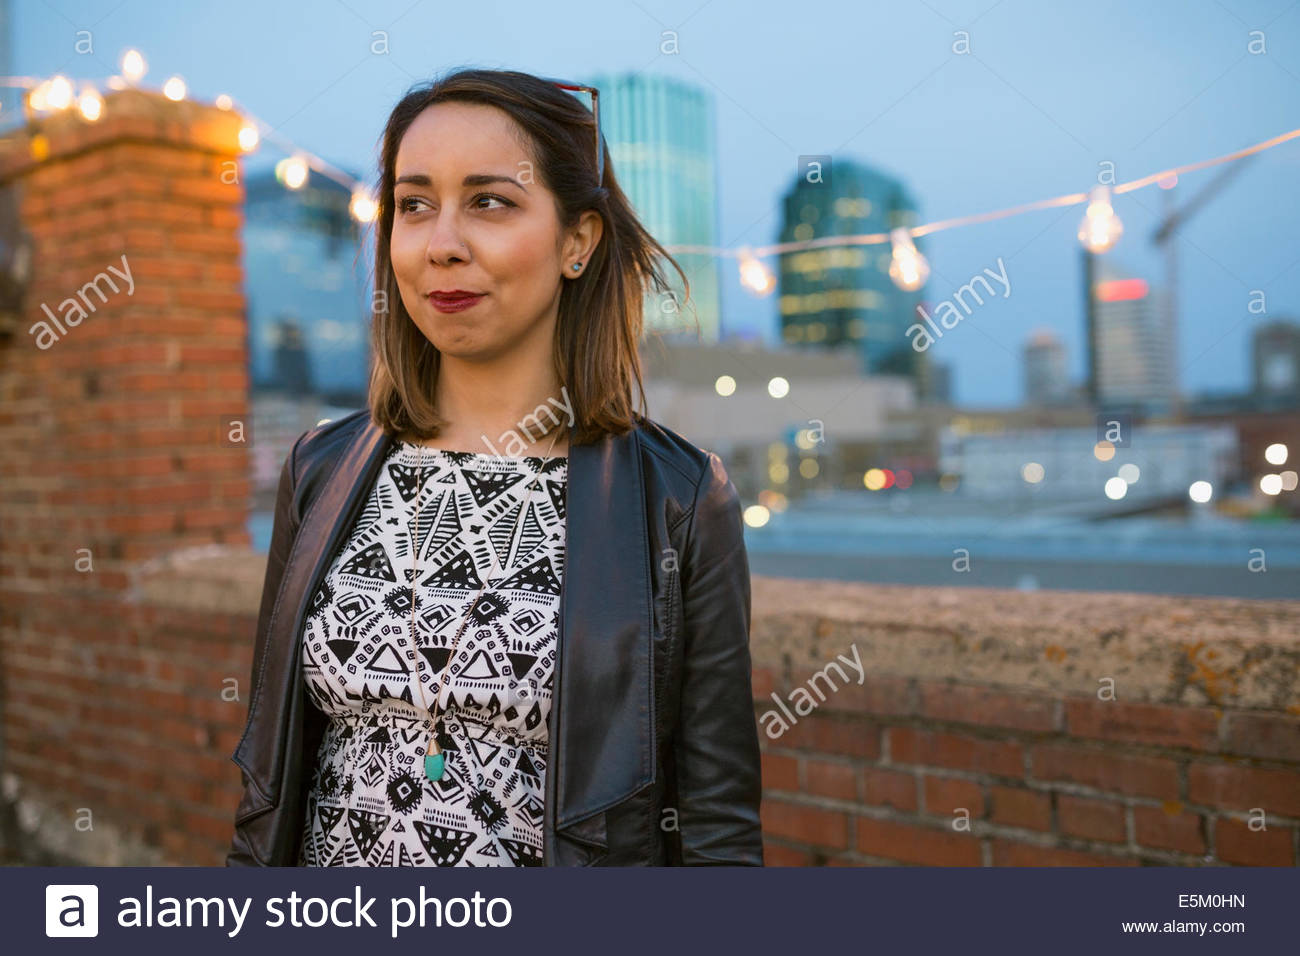 Smiling woman looking away on urban rooftop Stock Photo